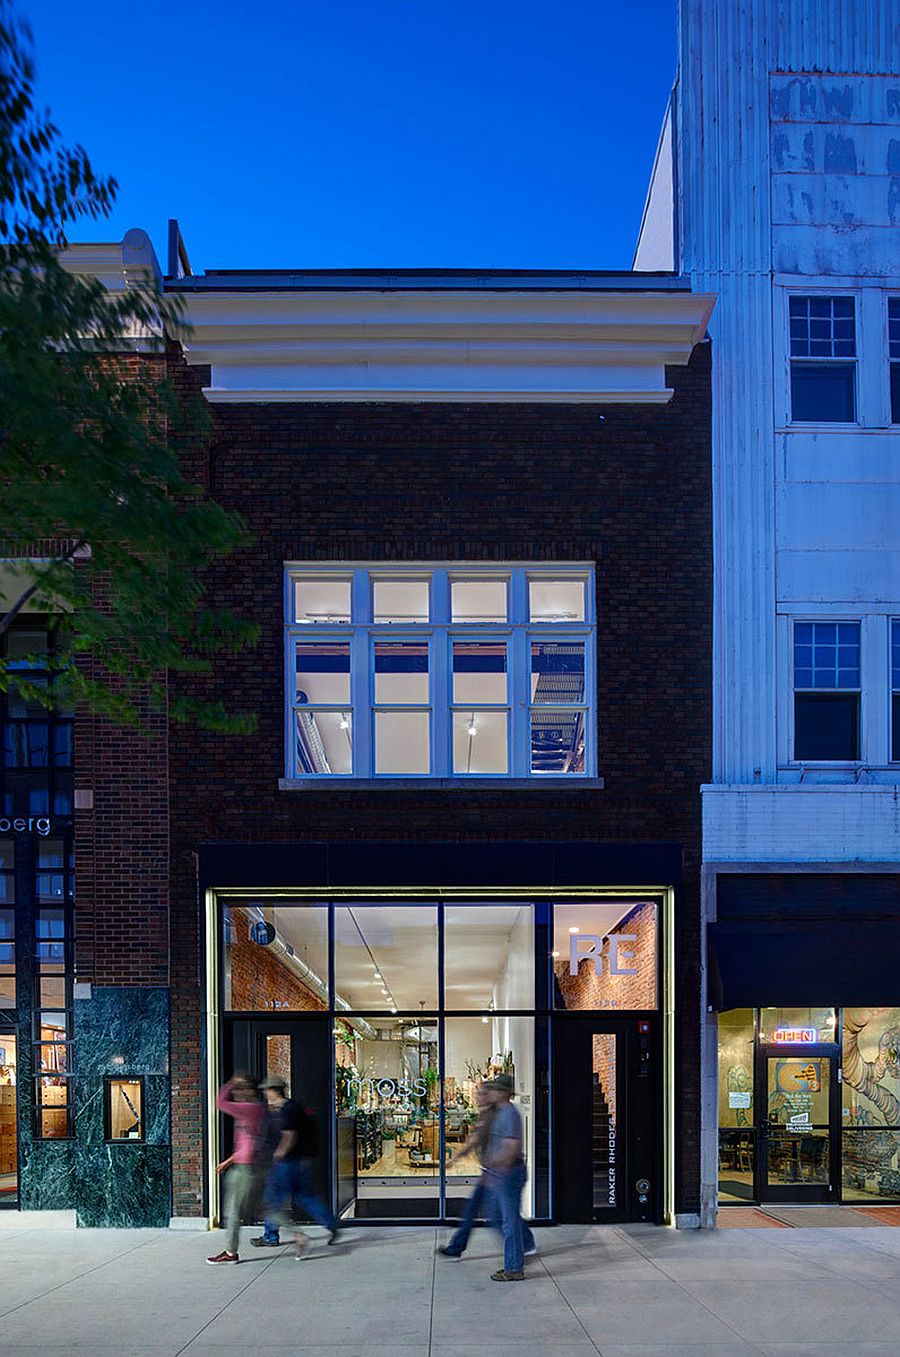 Glazed-black-anodized-aluminum-storefront-blends-in-with-the-classic-vibe-of-the-building